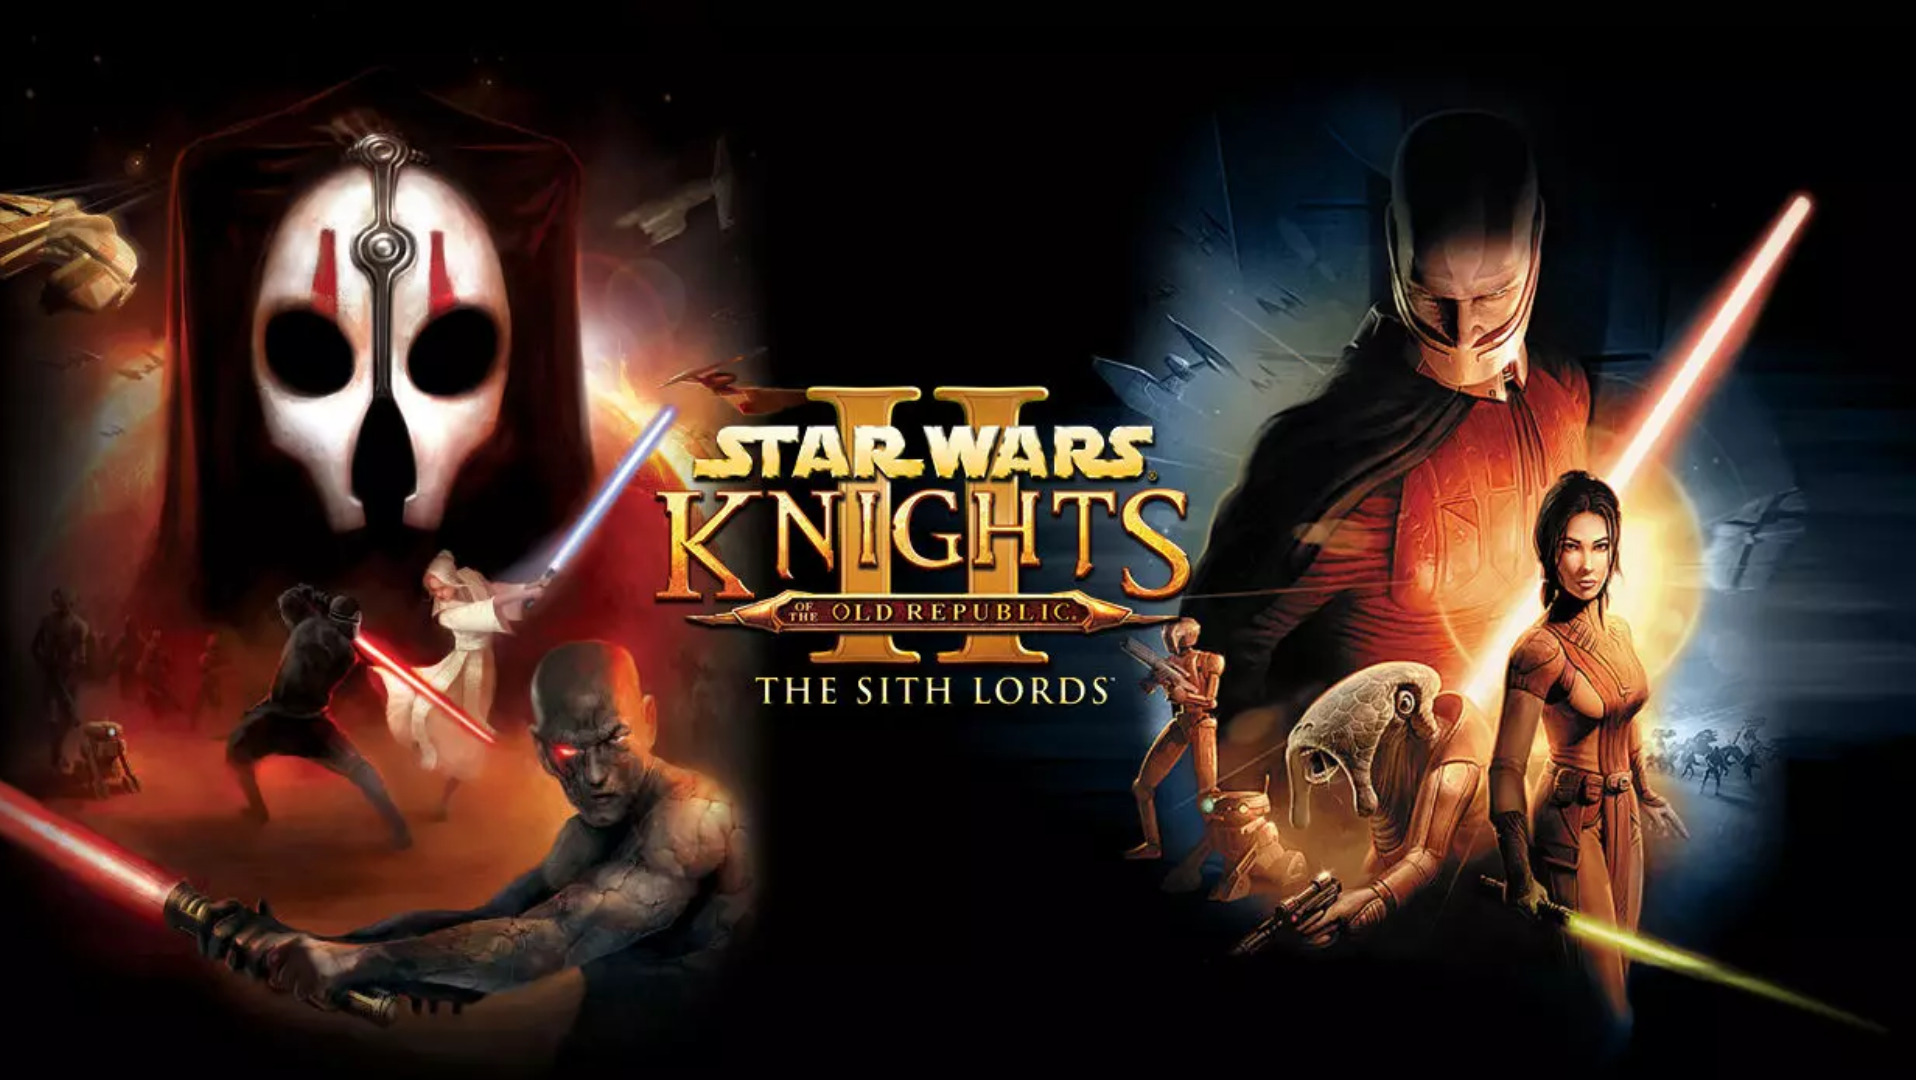 Star wars knights of the old republic русификатор для steam фото 15